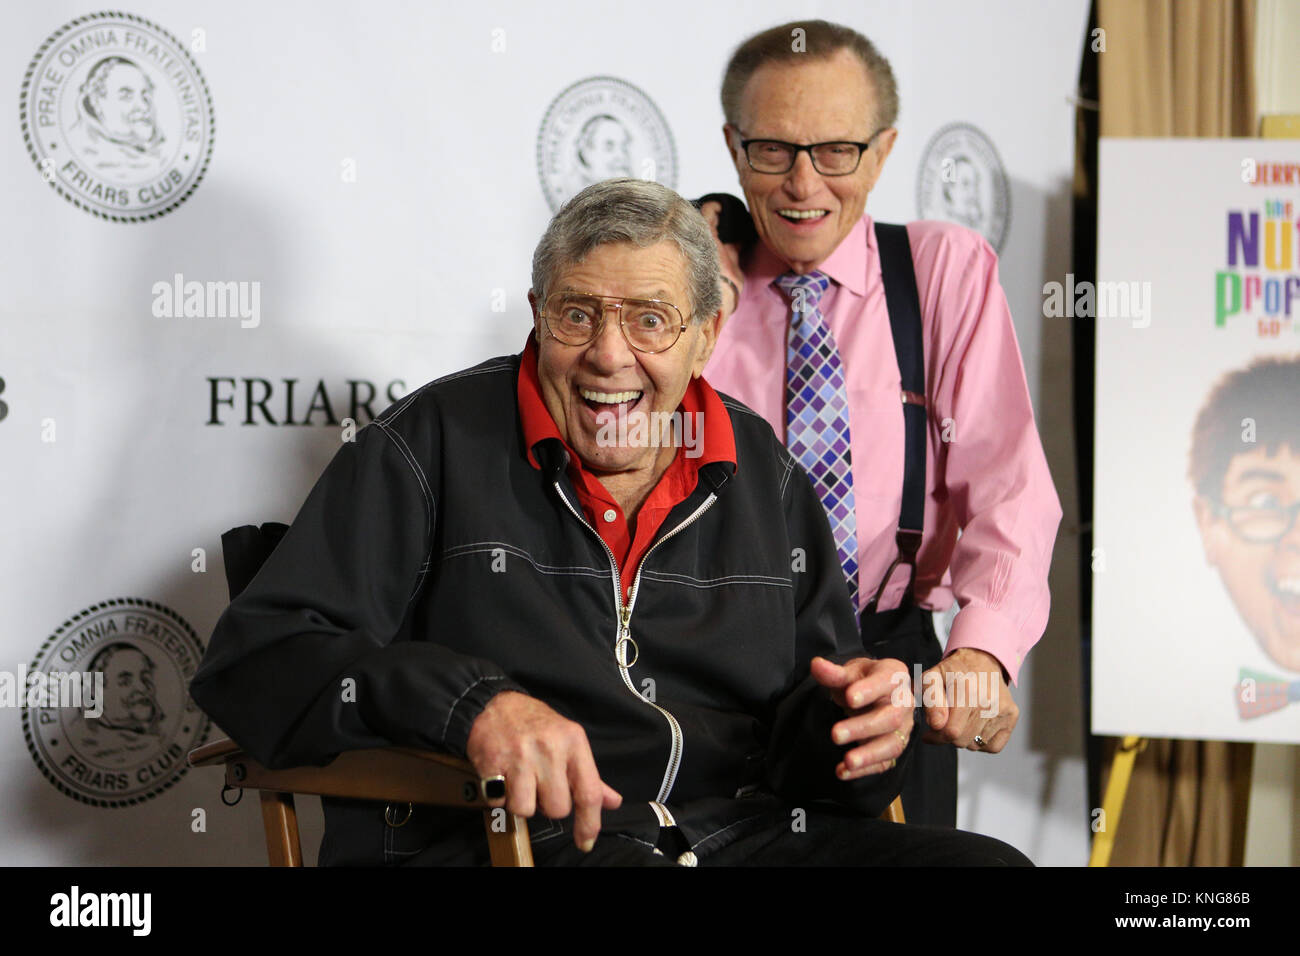 Jerry Lewis (L) and Larry King attend the Friars Club celebration of Jerry Lewis and the 50th anniversary 'The Nutty Professor' on June 5, 2014. Stock Photo